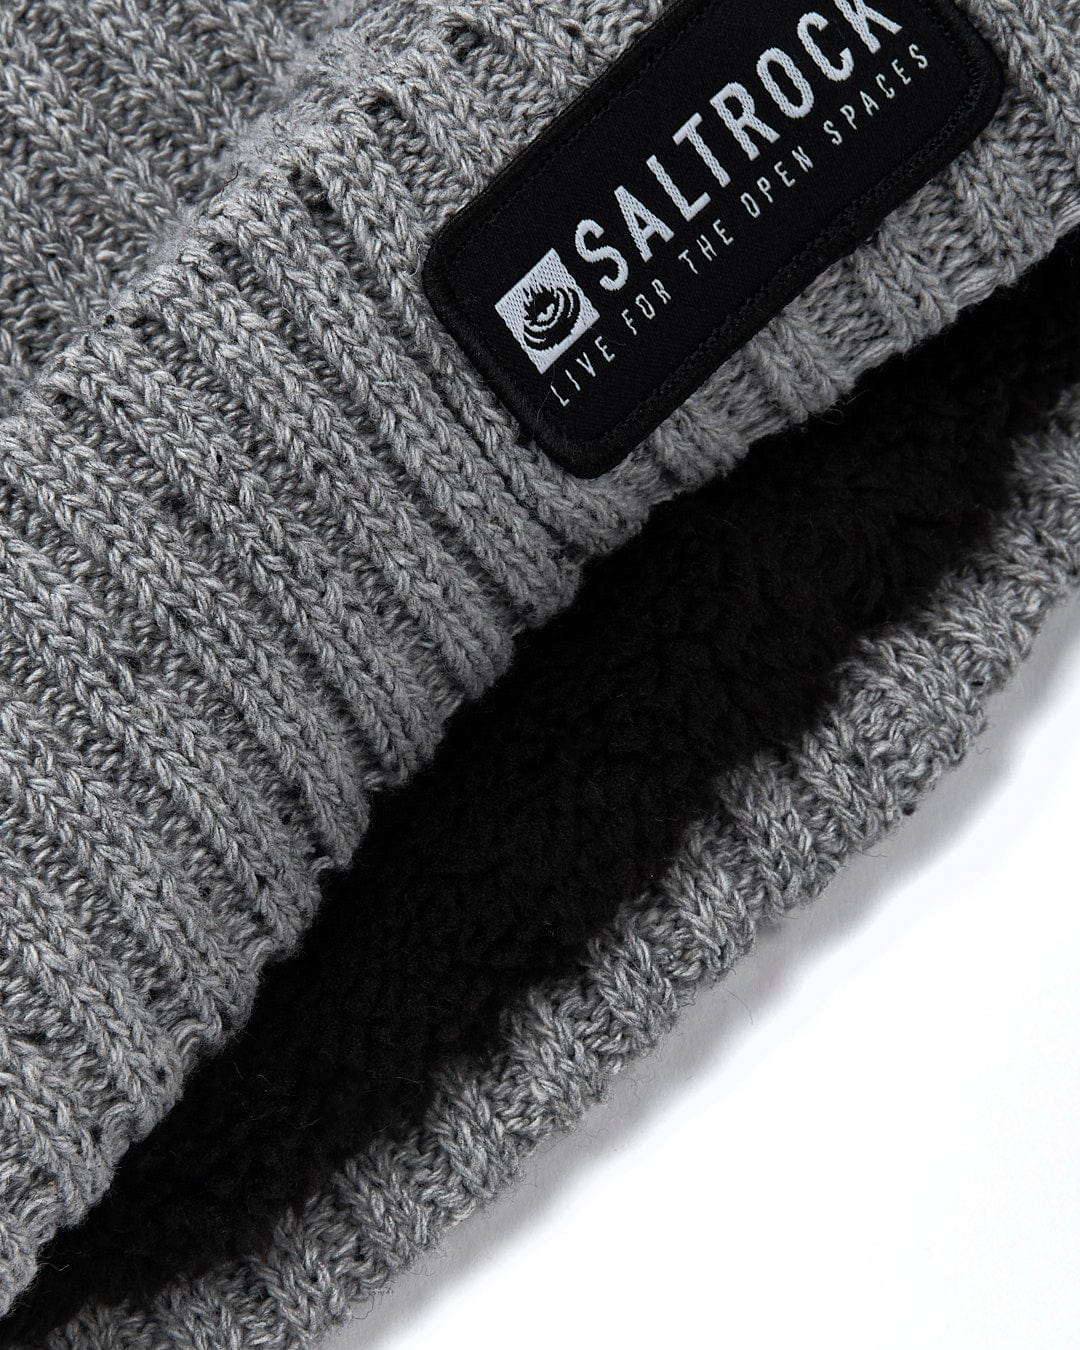 A Heritage - Beanie - Grey with the Saltrock logo on it.